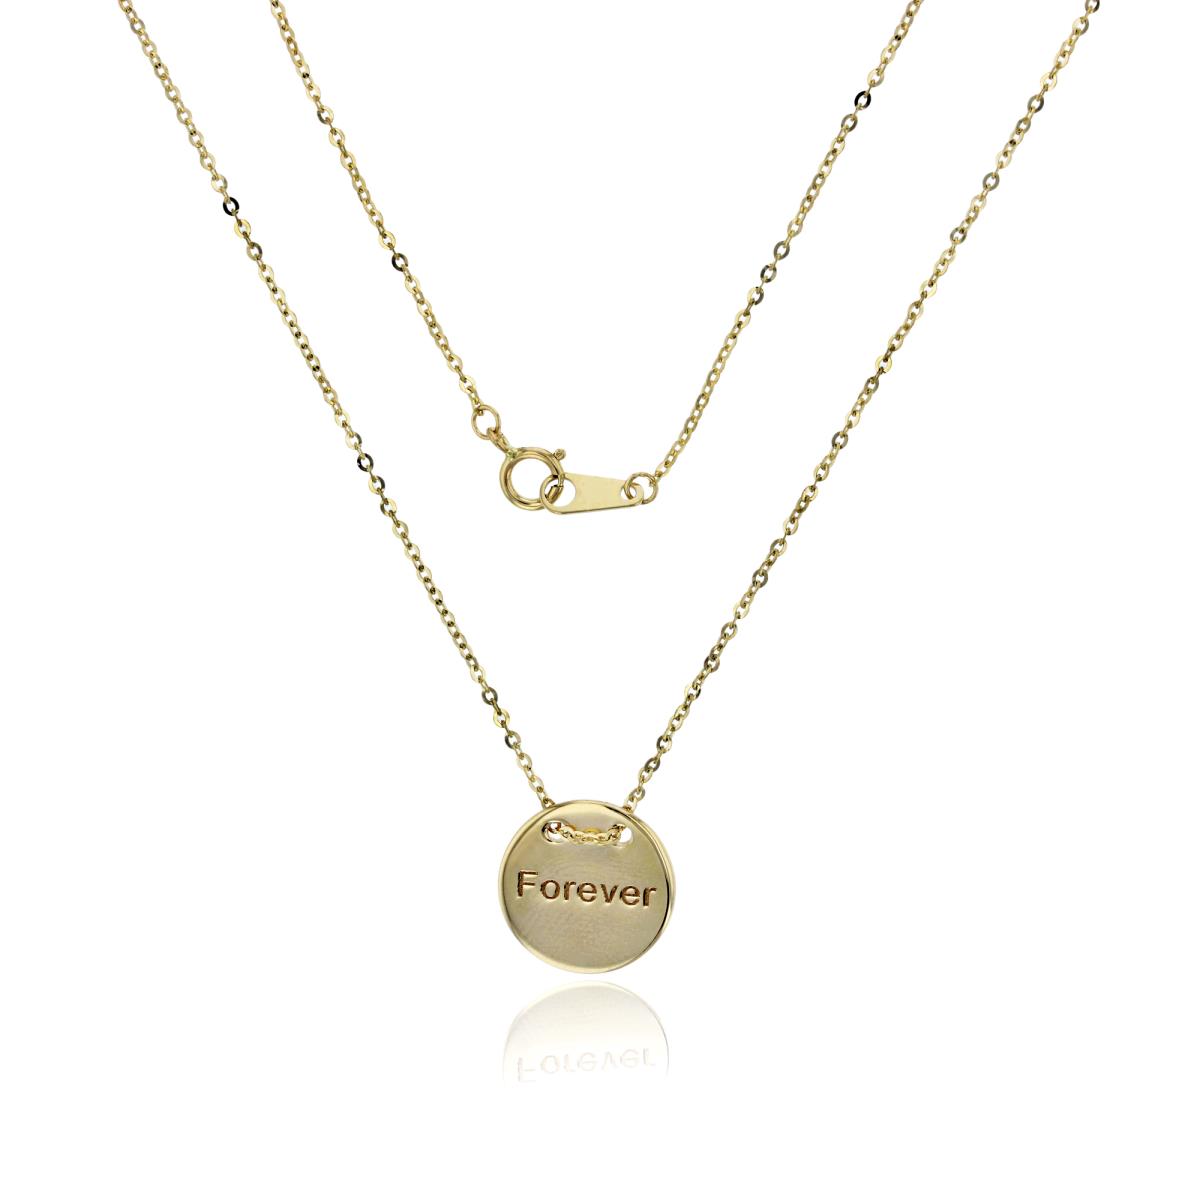 10K Yellow Gold High Polished "Forever" Engraved Circle Disc 16" Necklace